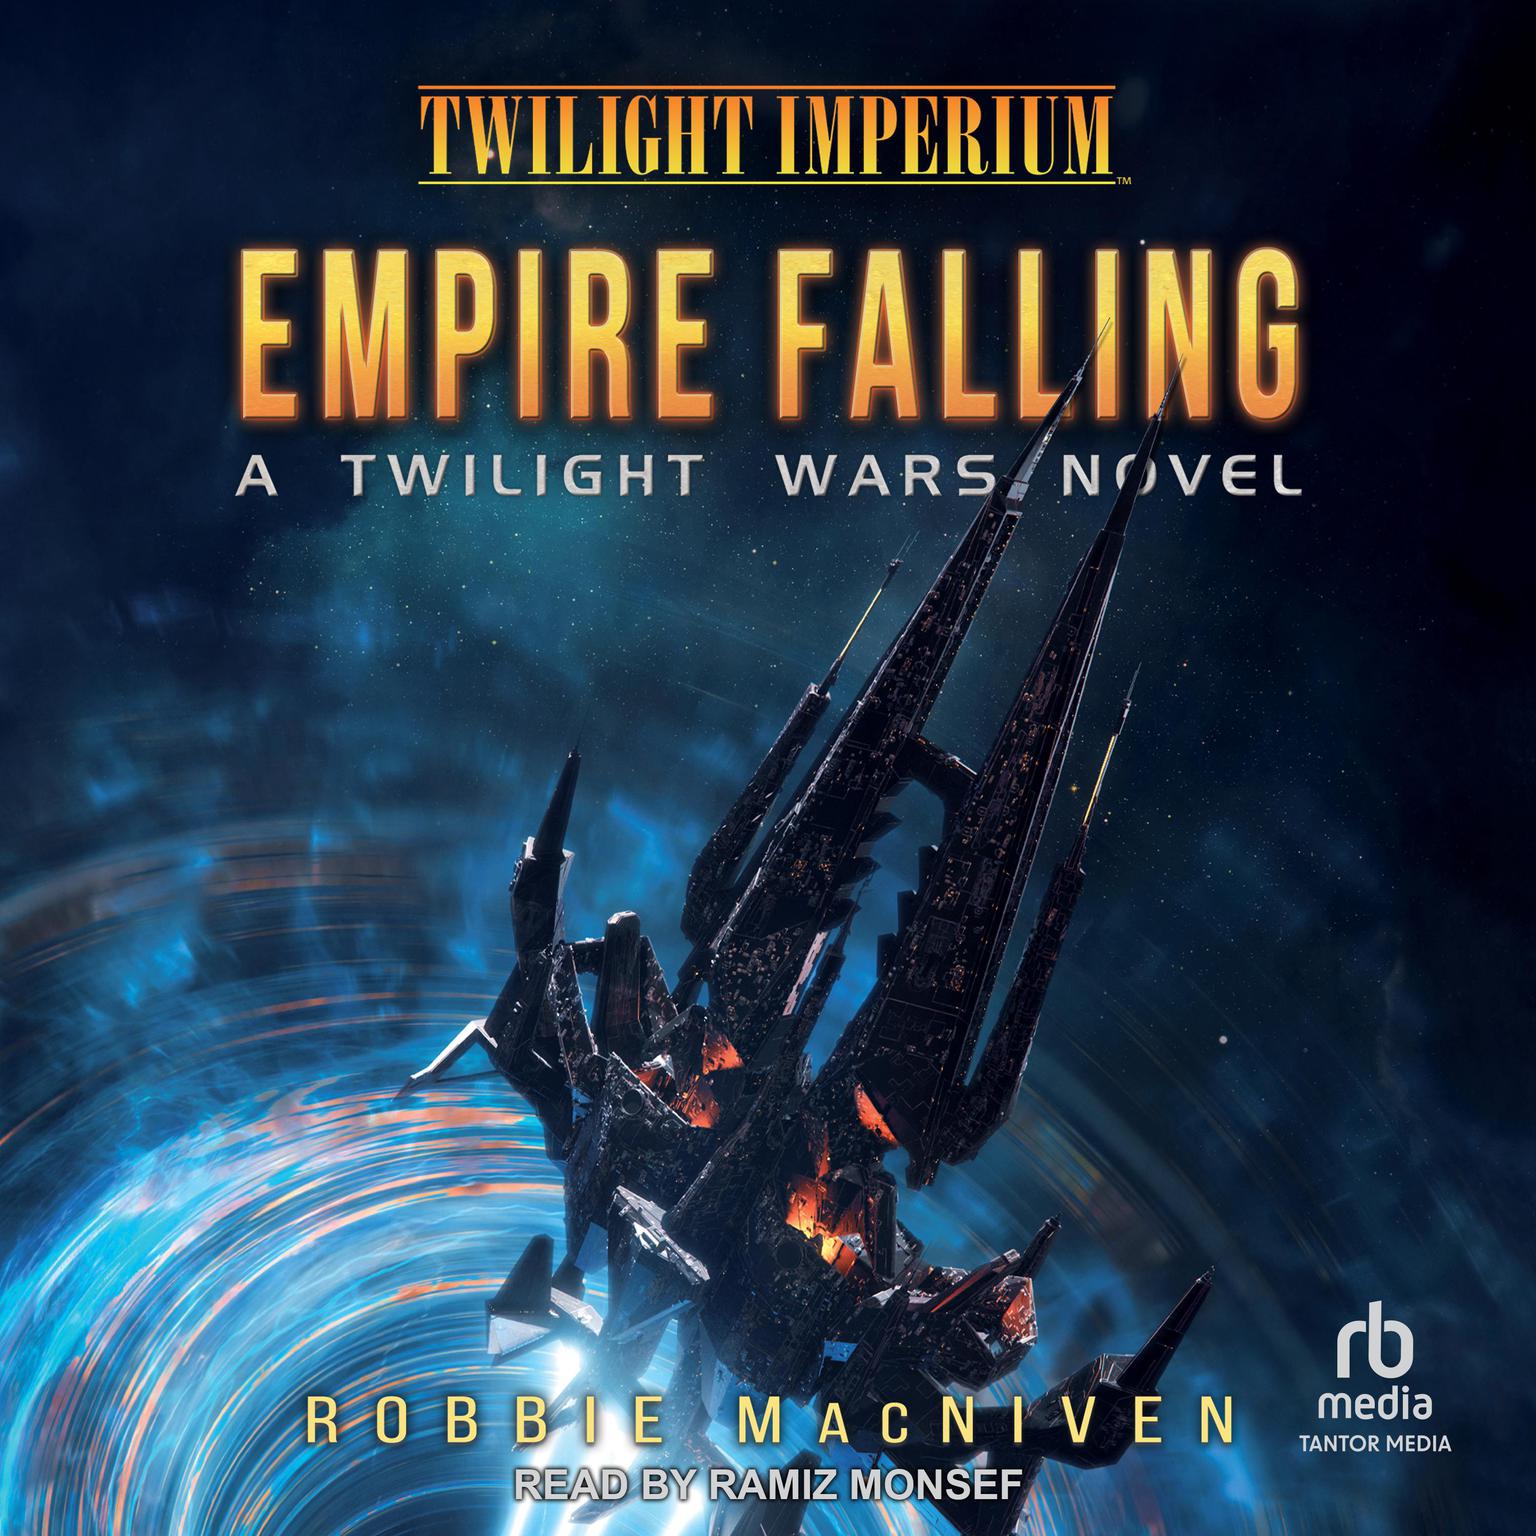 Twilight Wars: Empire Falling: A Twilight Imperium Novel Audiobook, by Robbie MacNiven